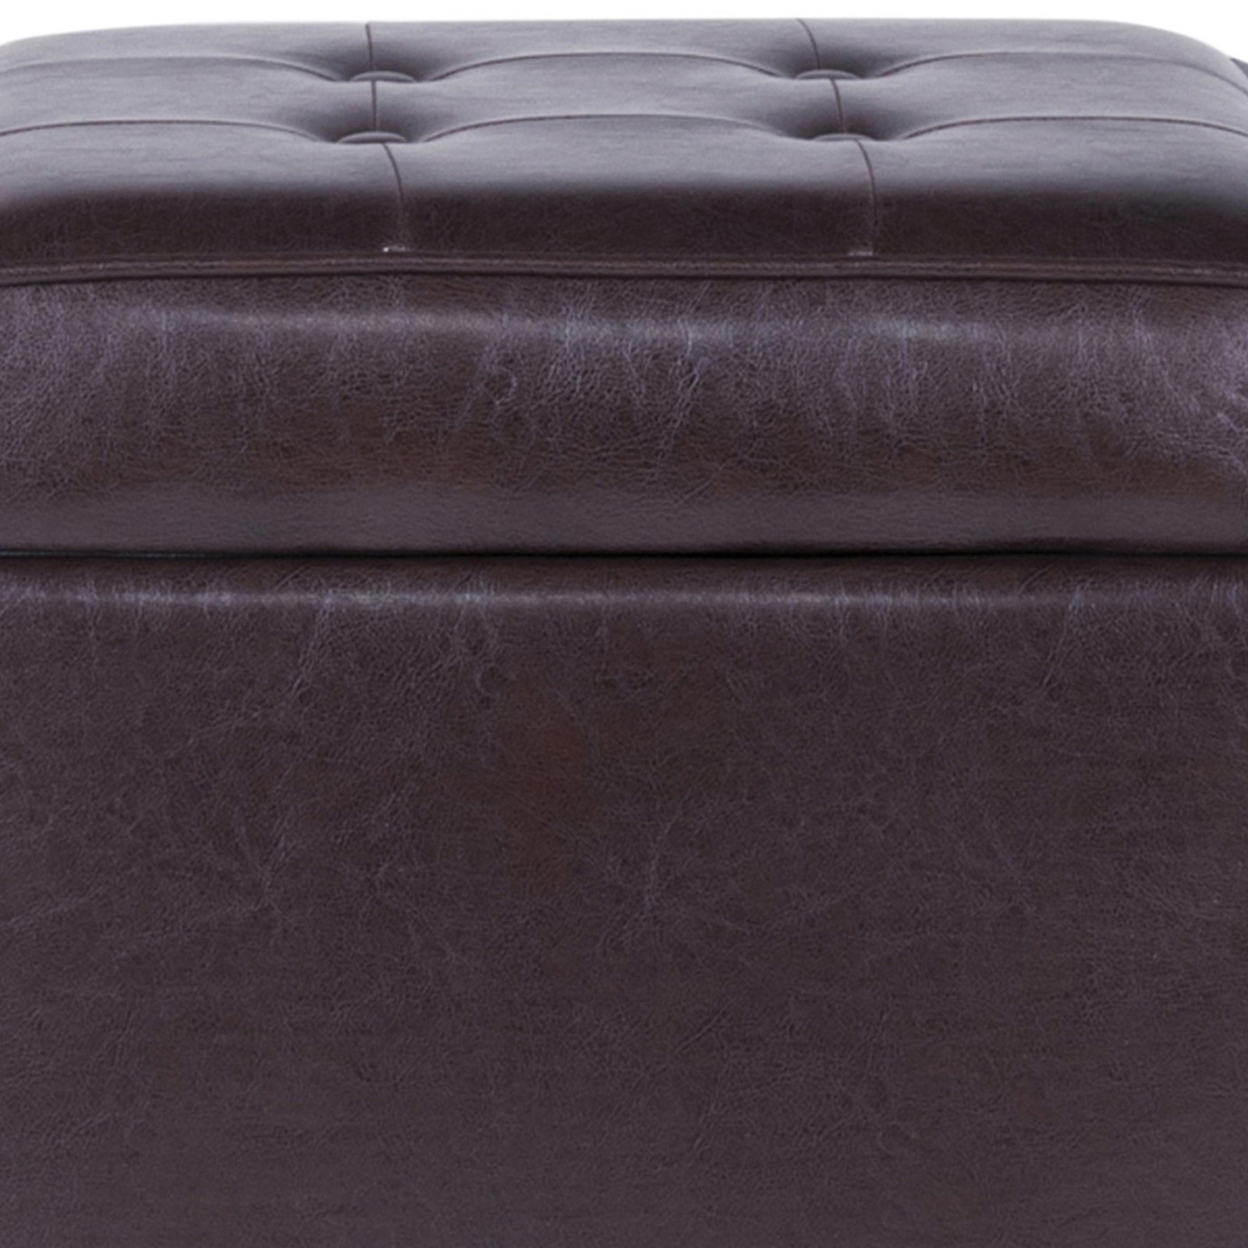 Square Shape Leatherette Upholstered Wooden Ottoman With Tufted Lift Off Lid Storage, Brown- Saltoro Sherpi